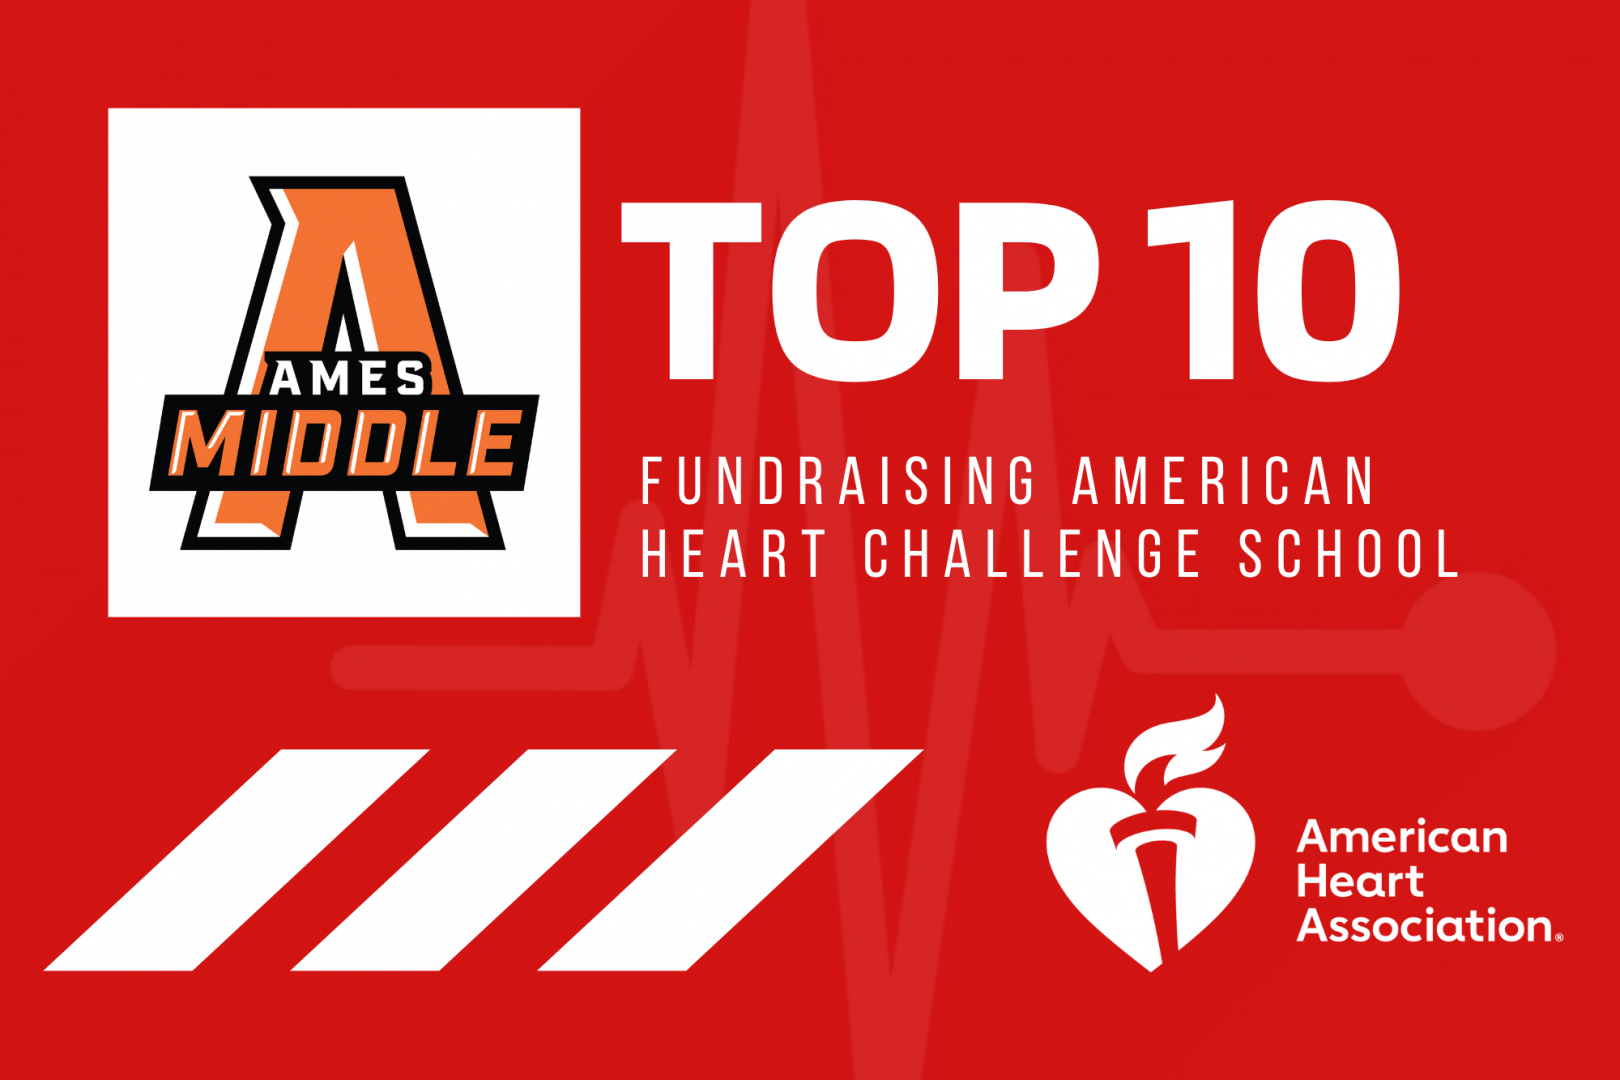 Ames Middle School a Top 10 Fundraising American Heart Challenge School